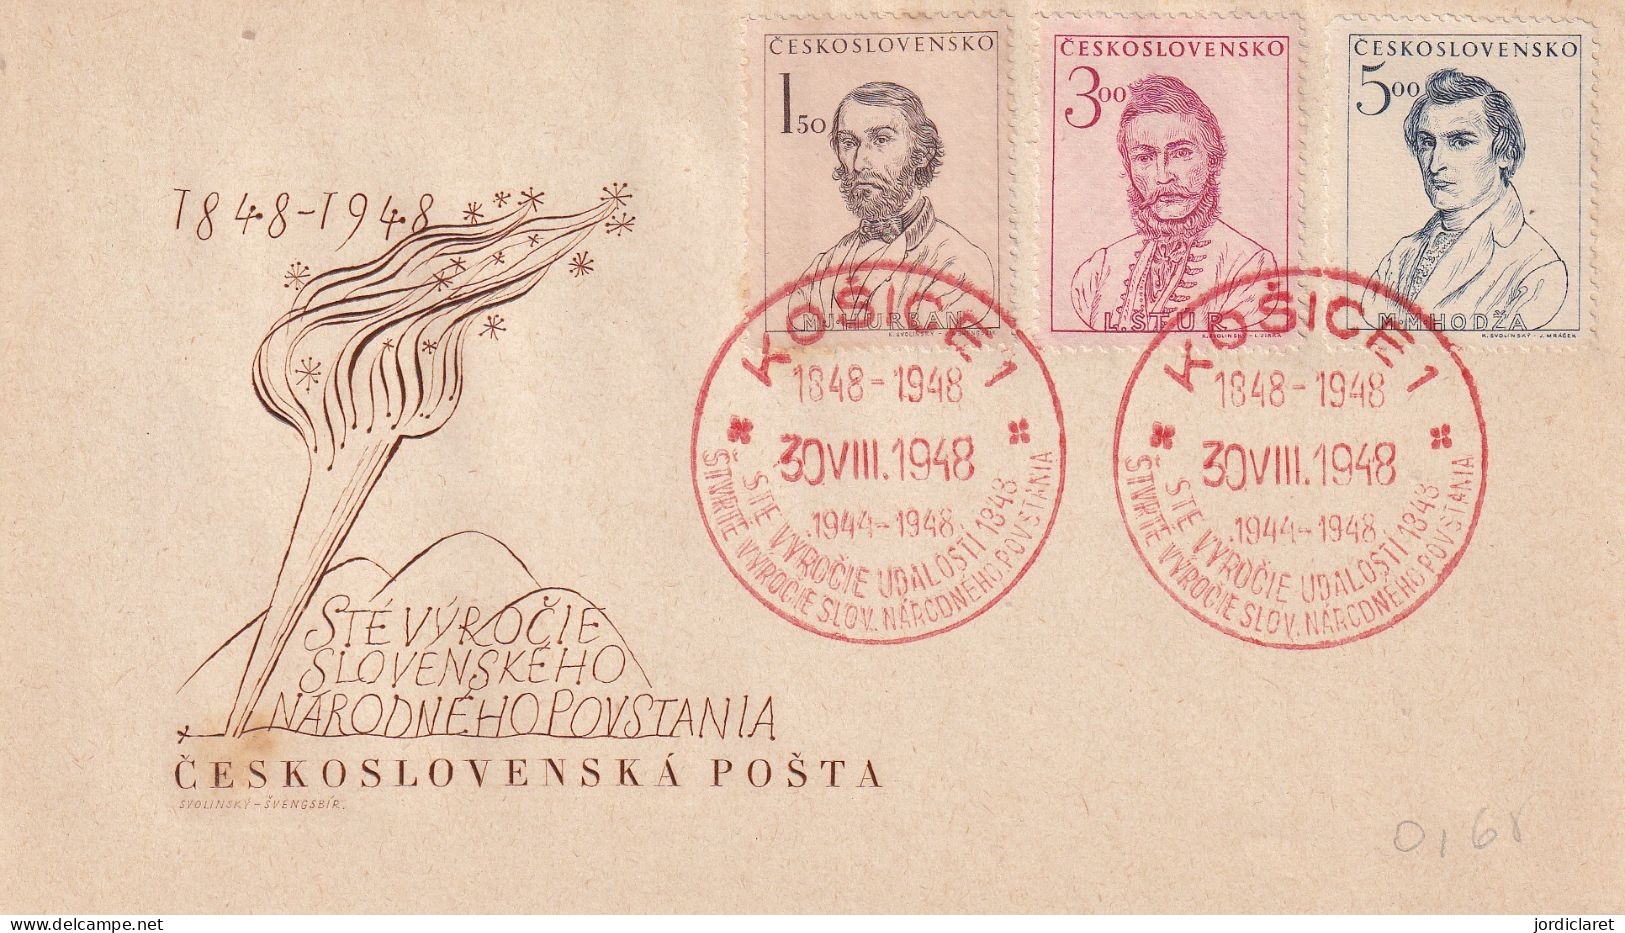 FDC 1948 - FDC